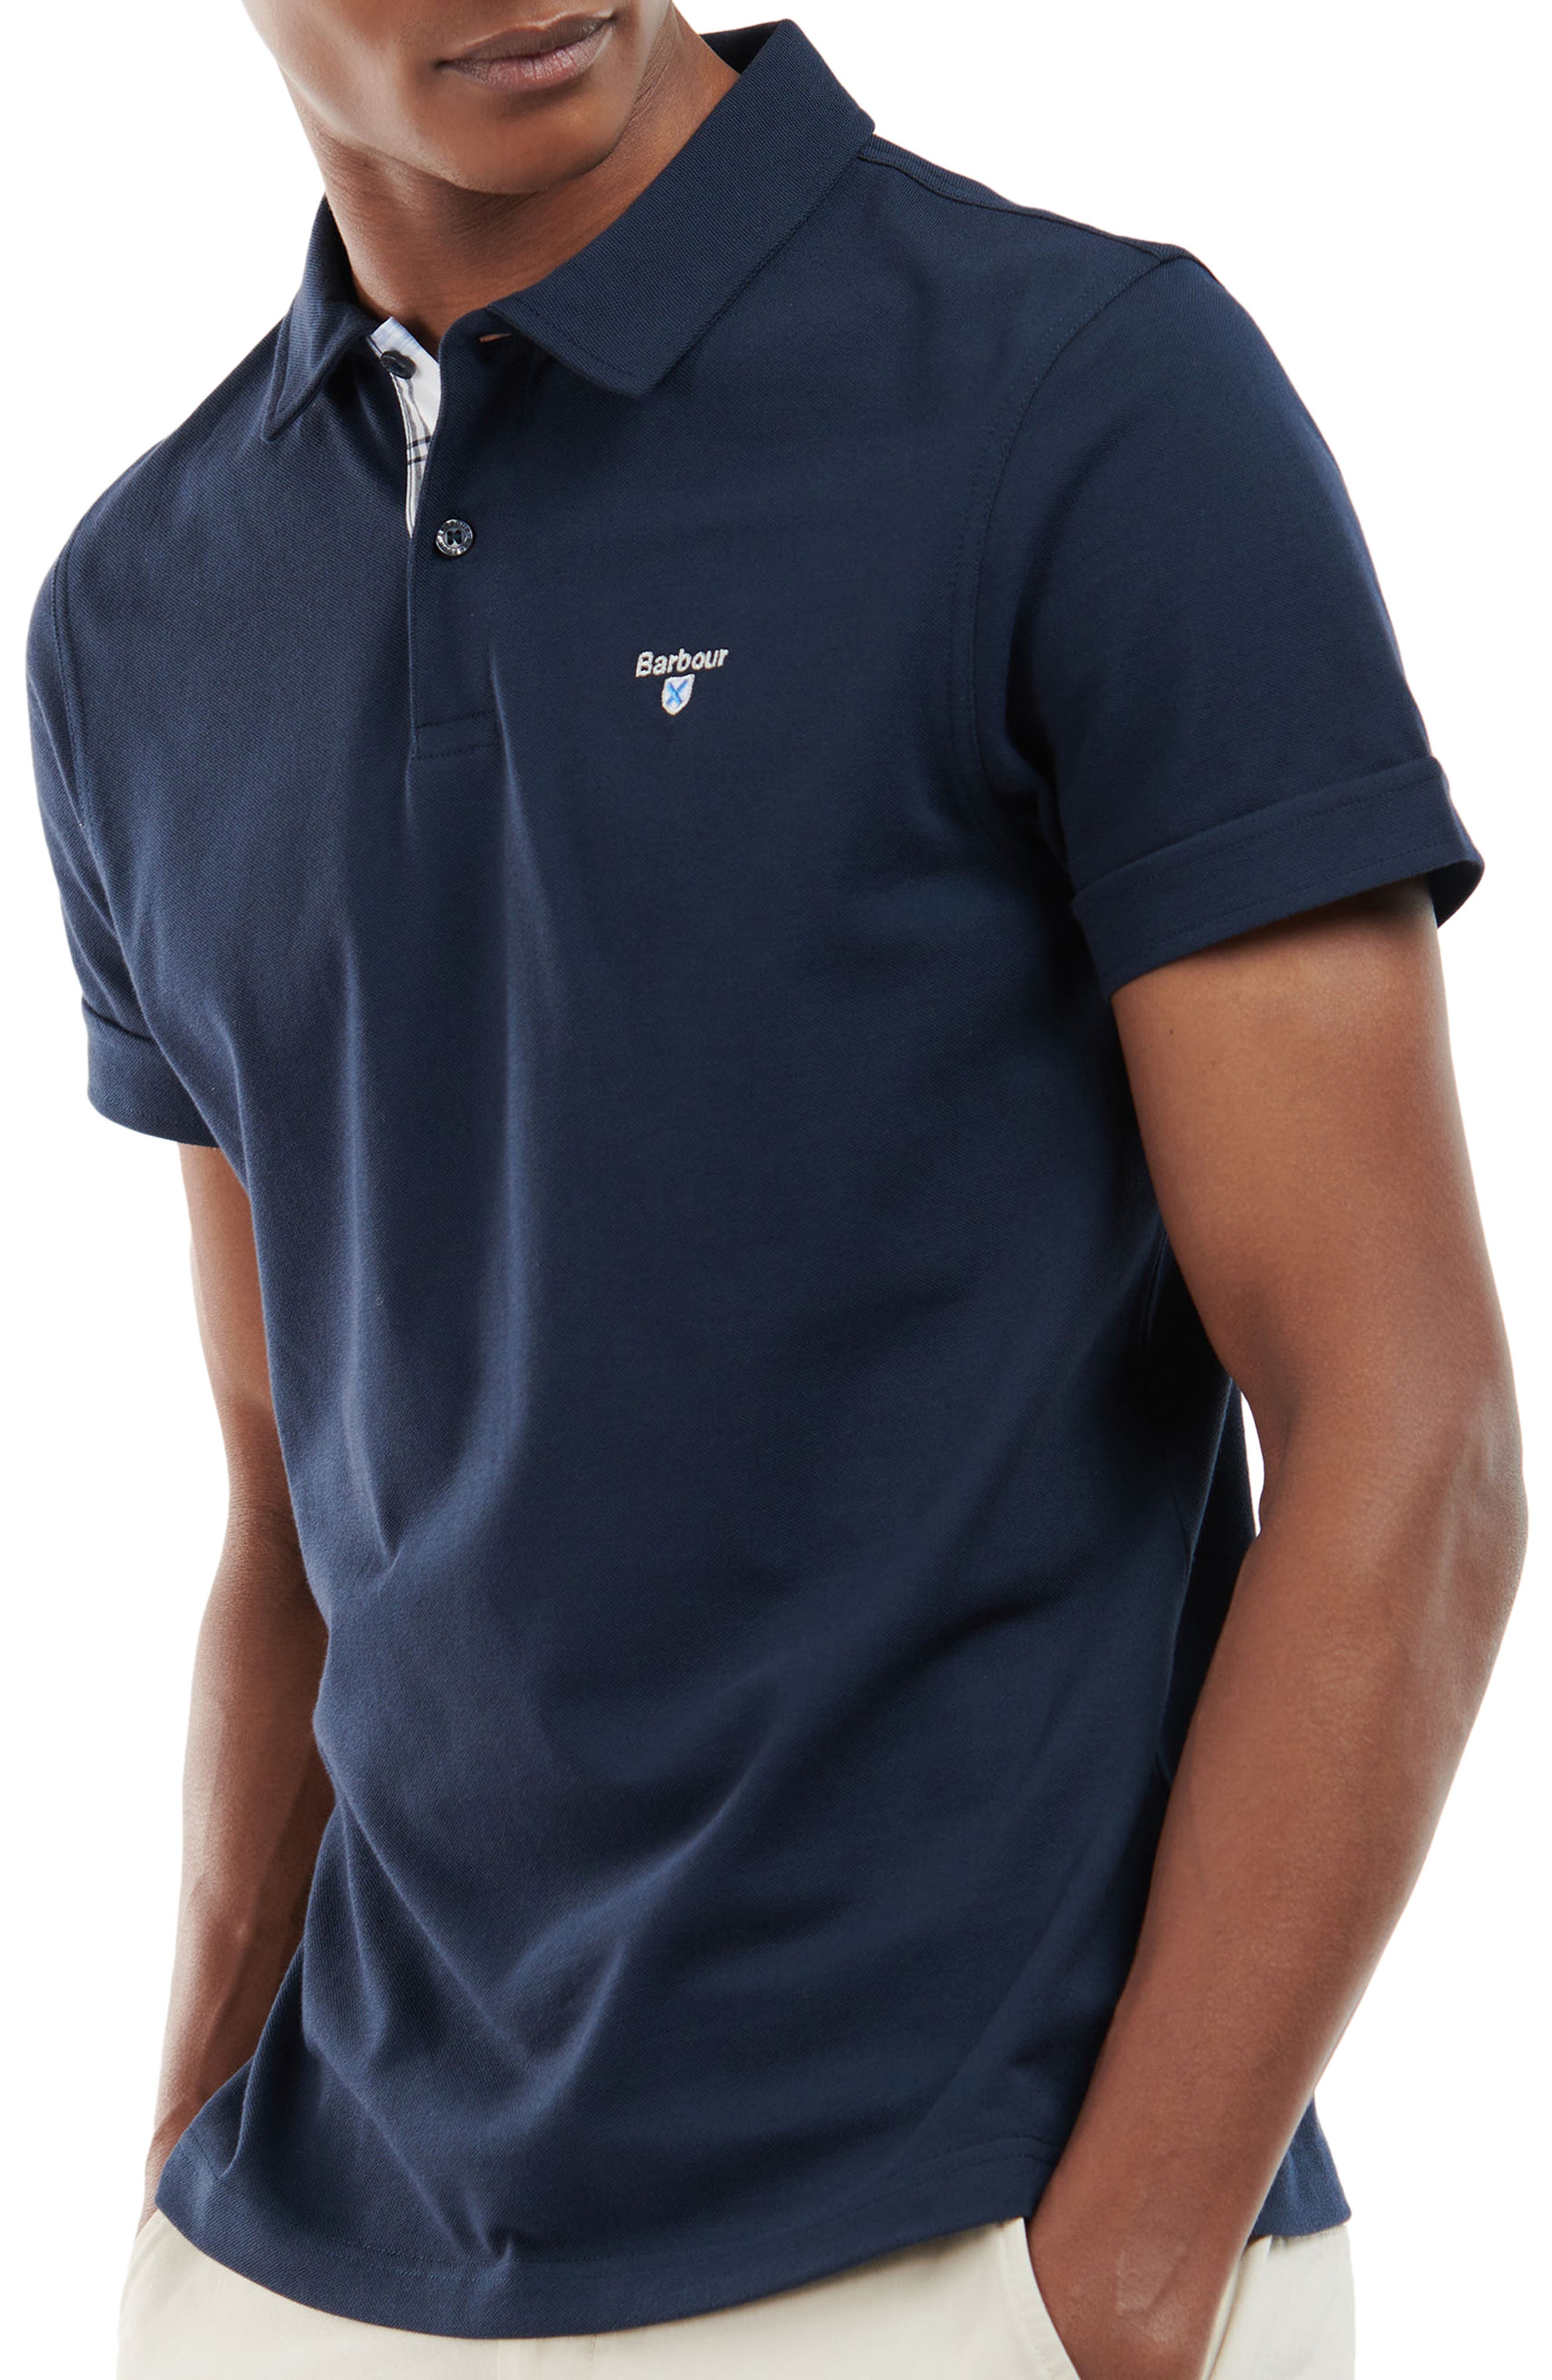 Men's Barbour Polo Shirts | Nordstrom